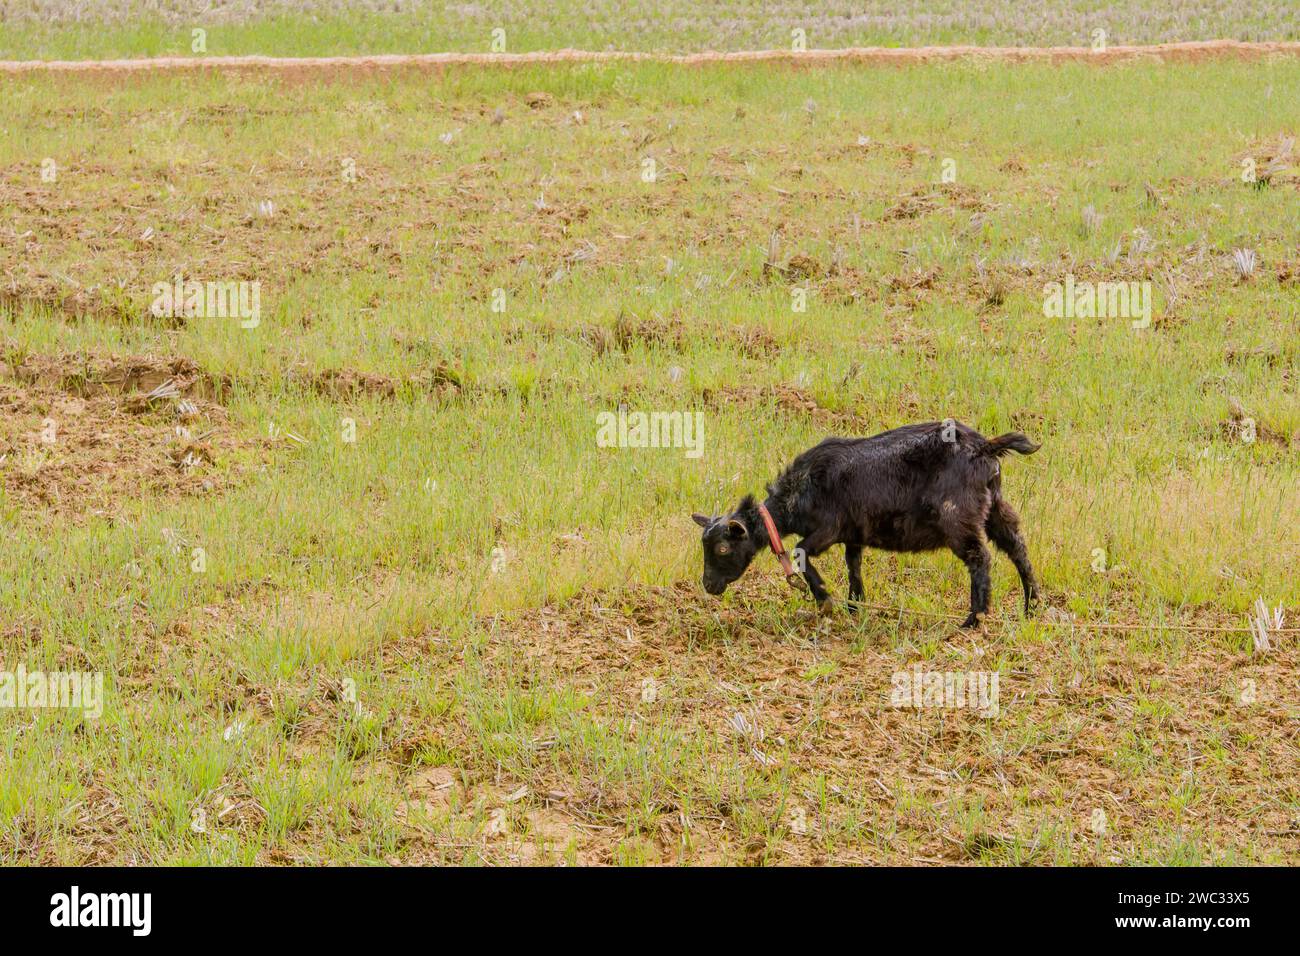 Young black Bengal goat with red collar attached to rope around neck in an open field Stock Photo